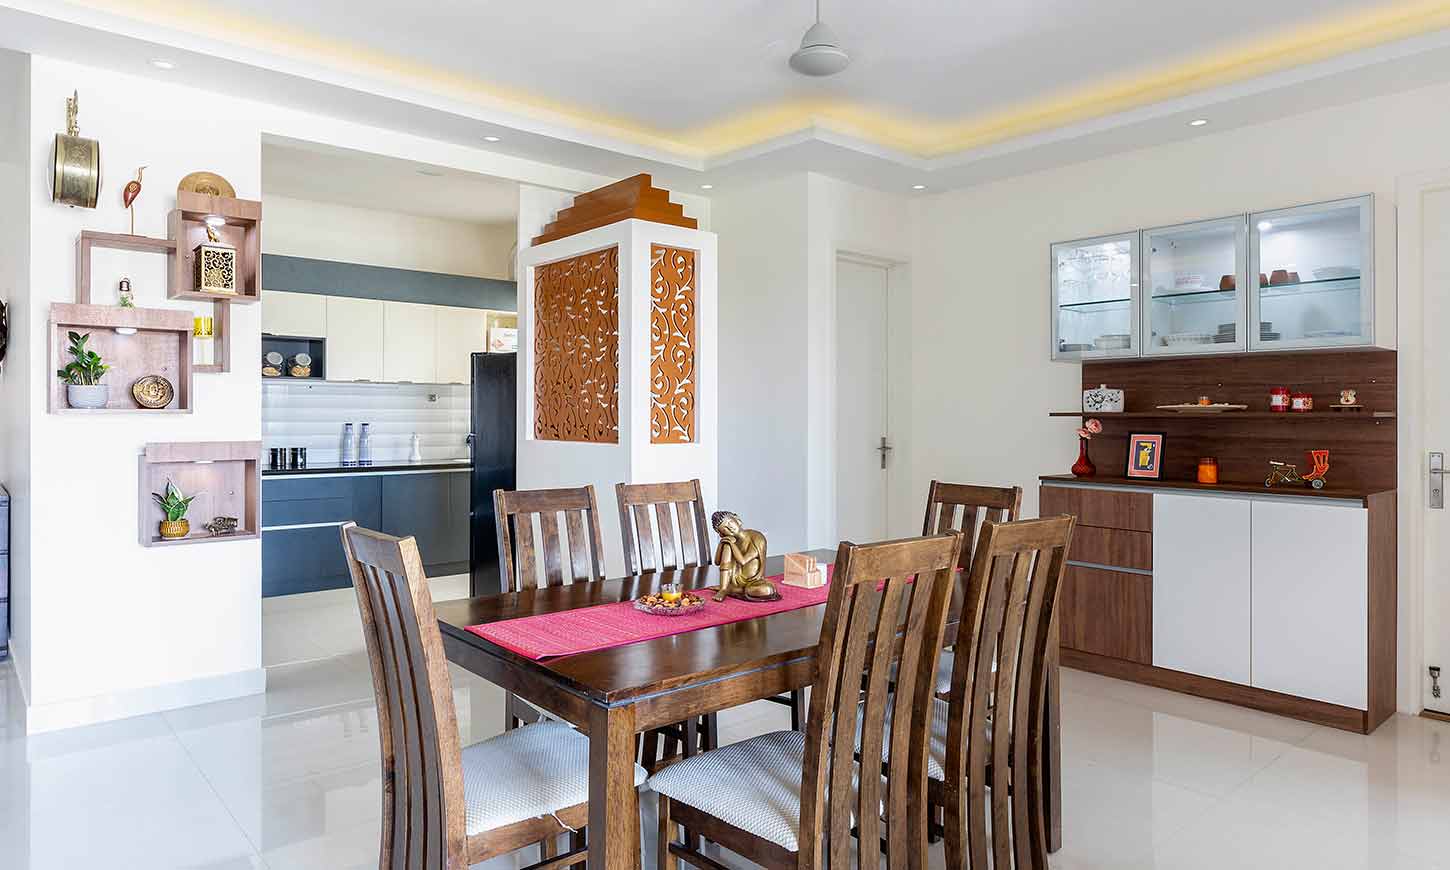 Dining room interior done by one of the best Interior designers in bangalore